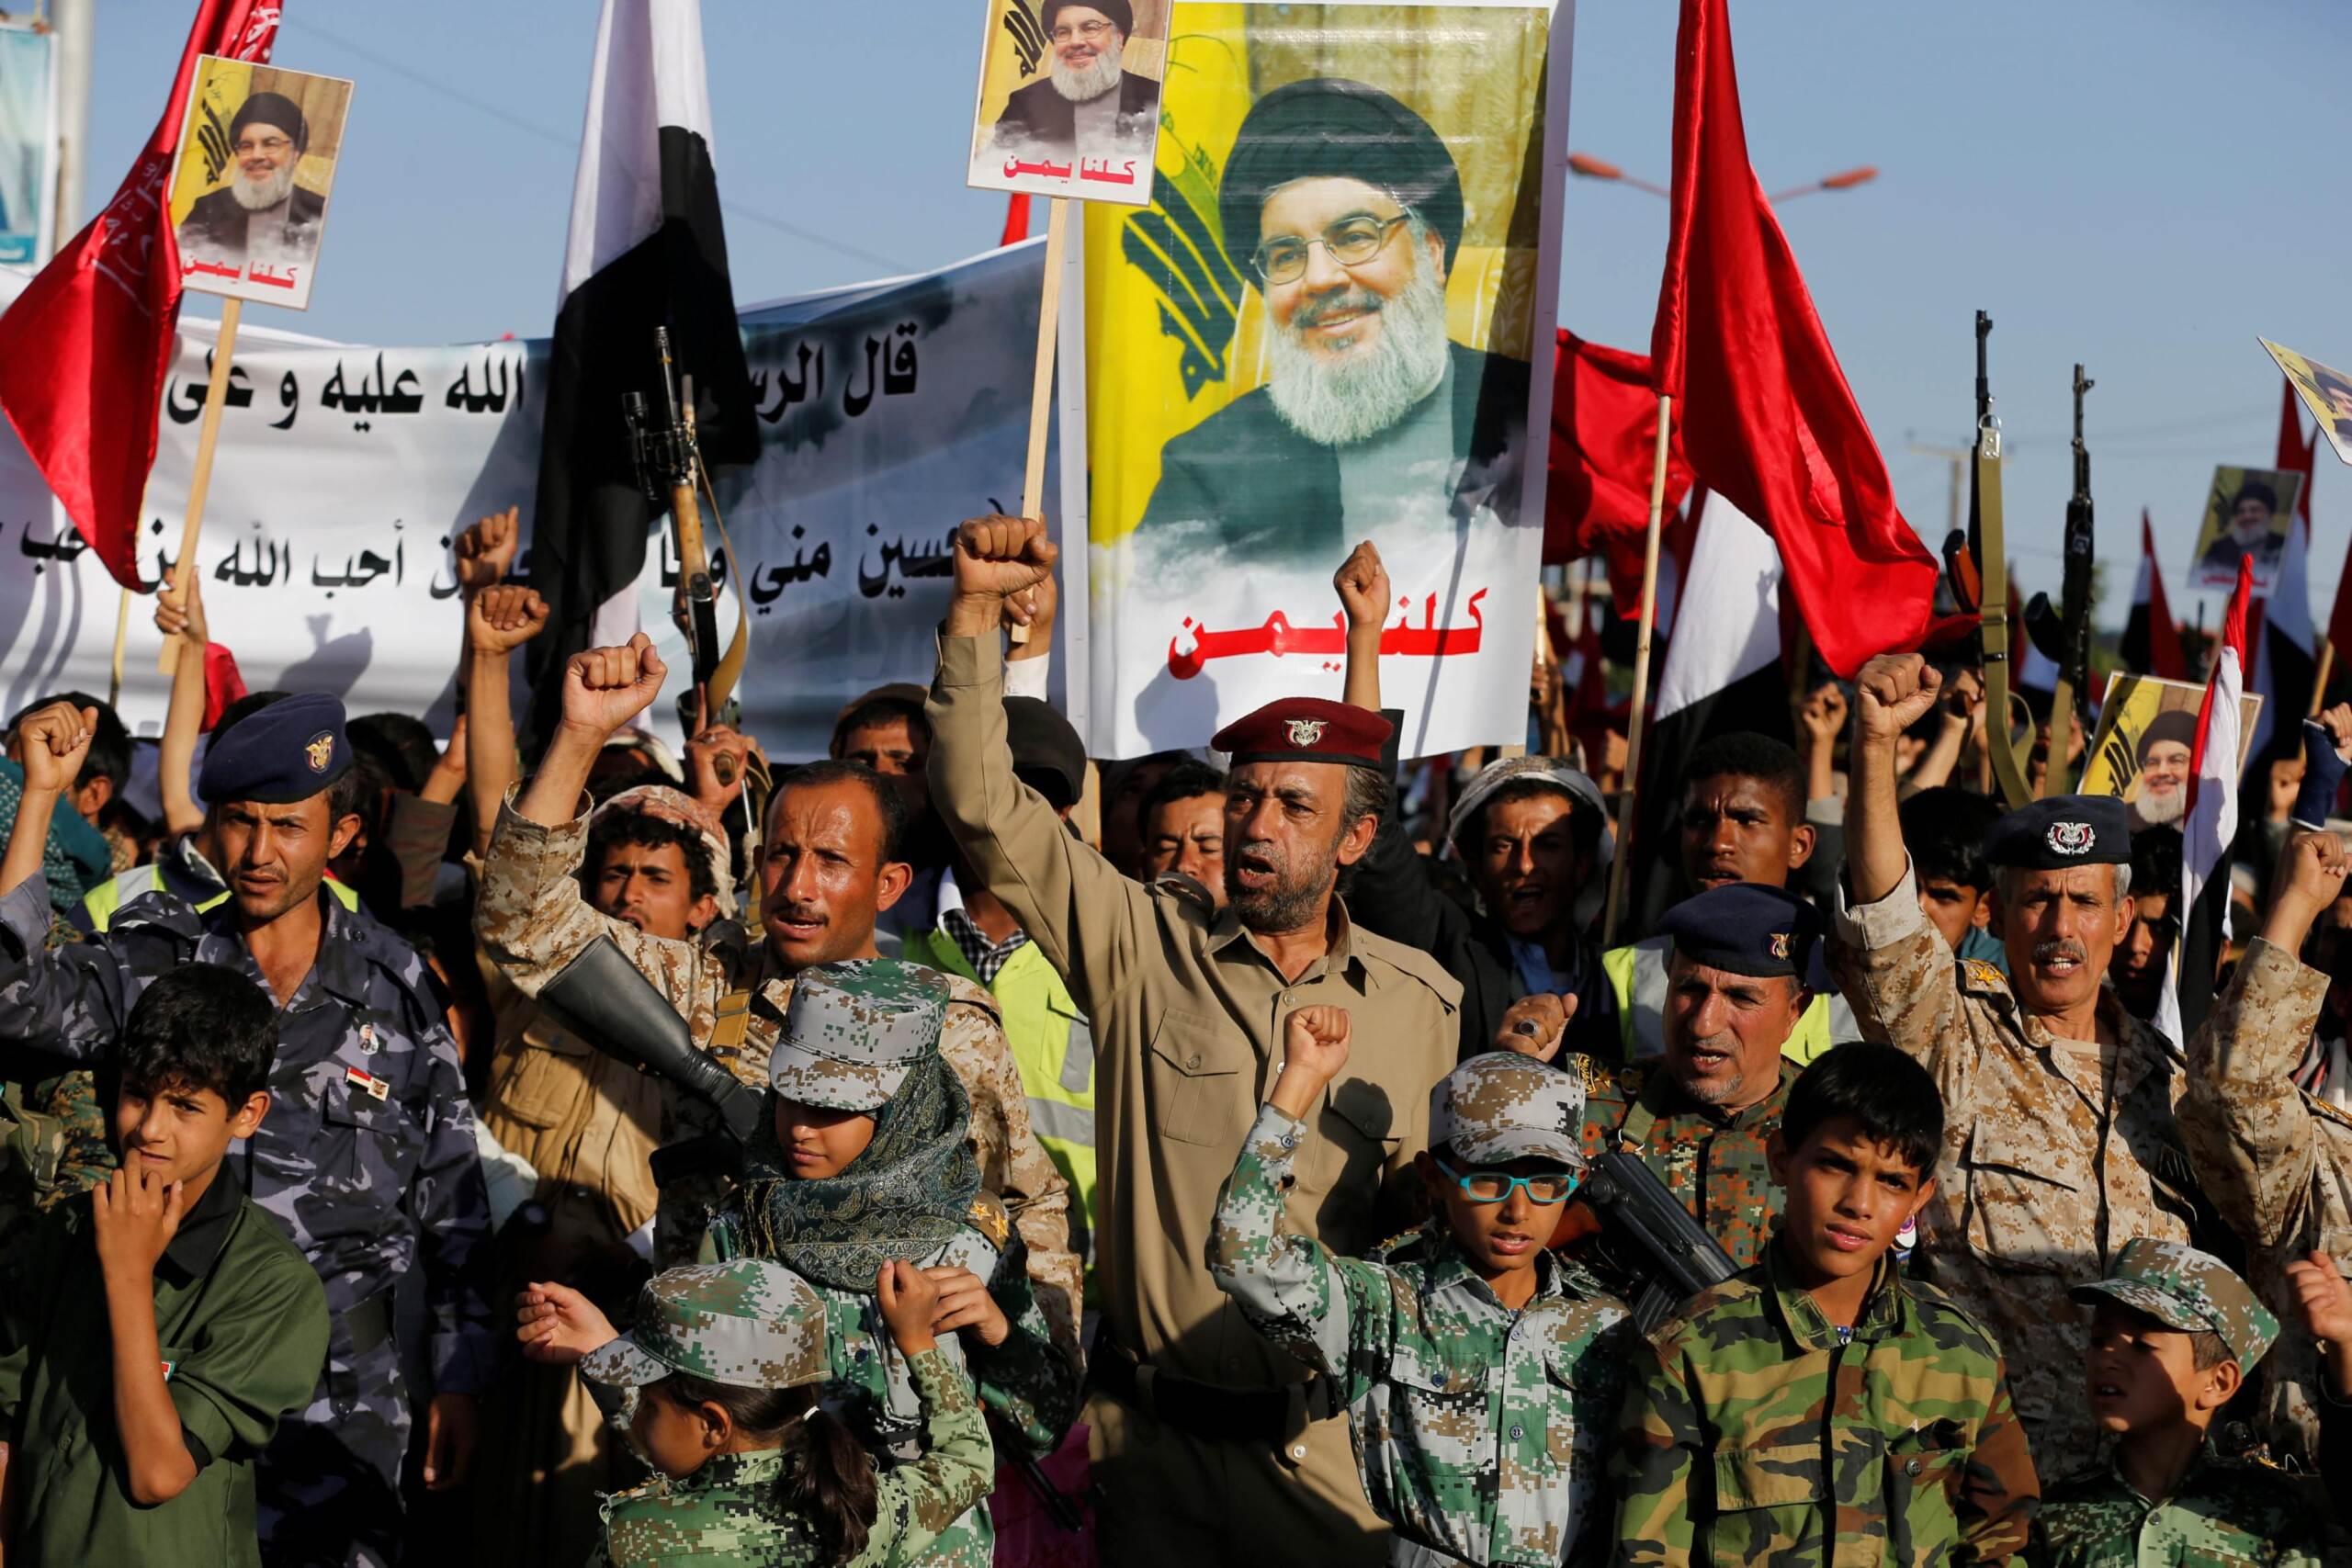 ifmat - Pro-Iran forces seek to topple Iraqi PM over ties to US